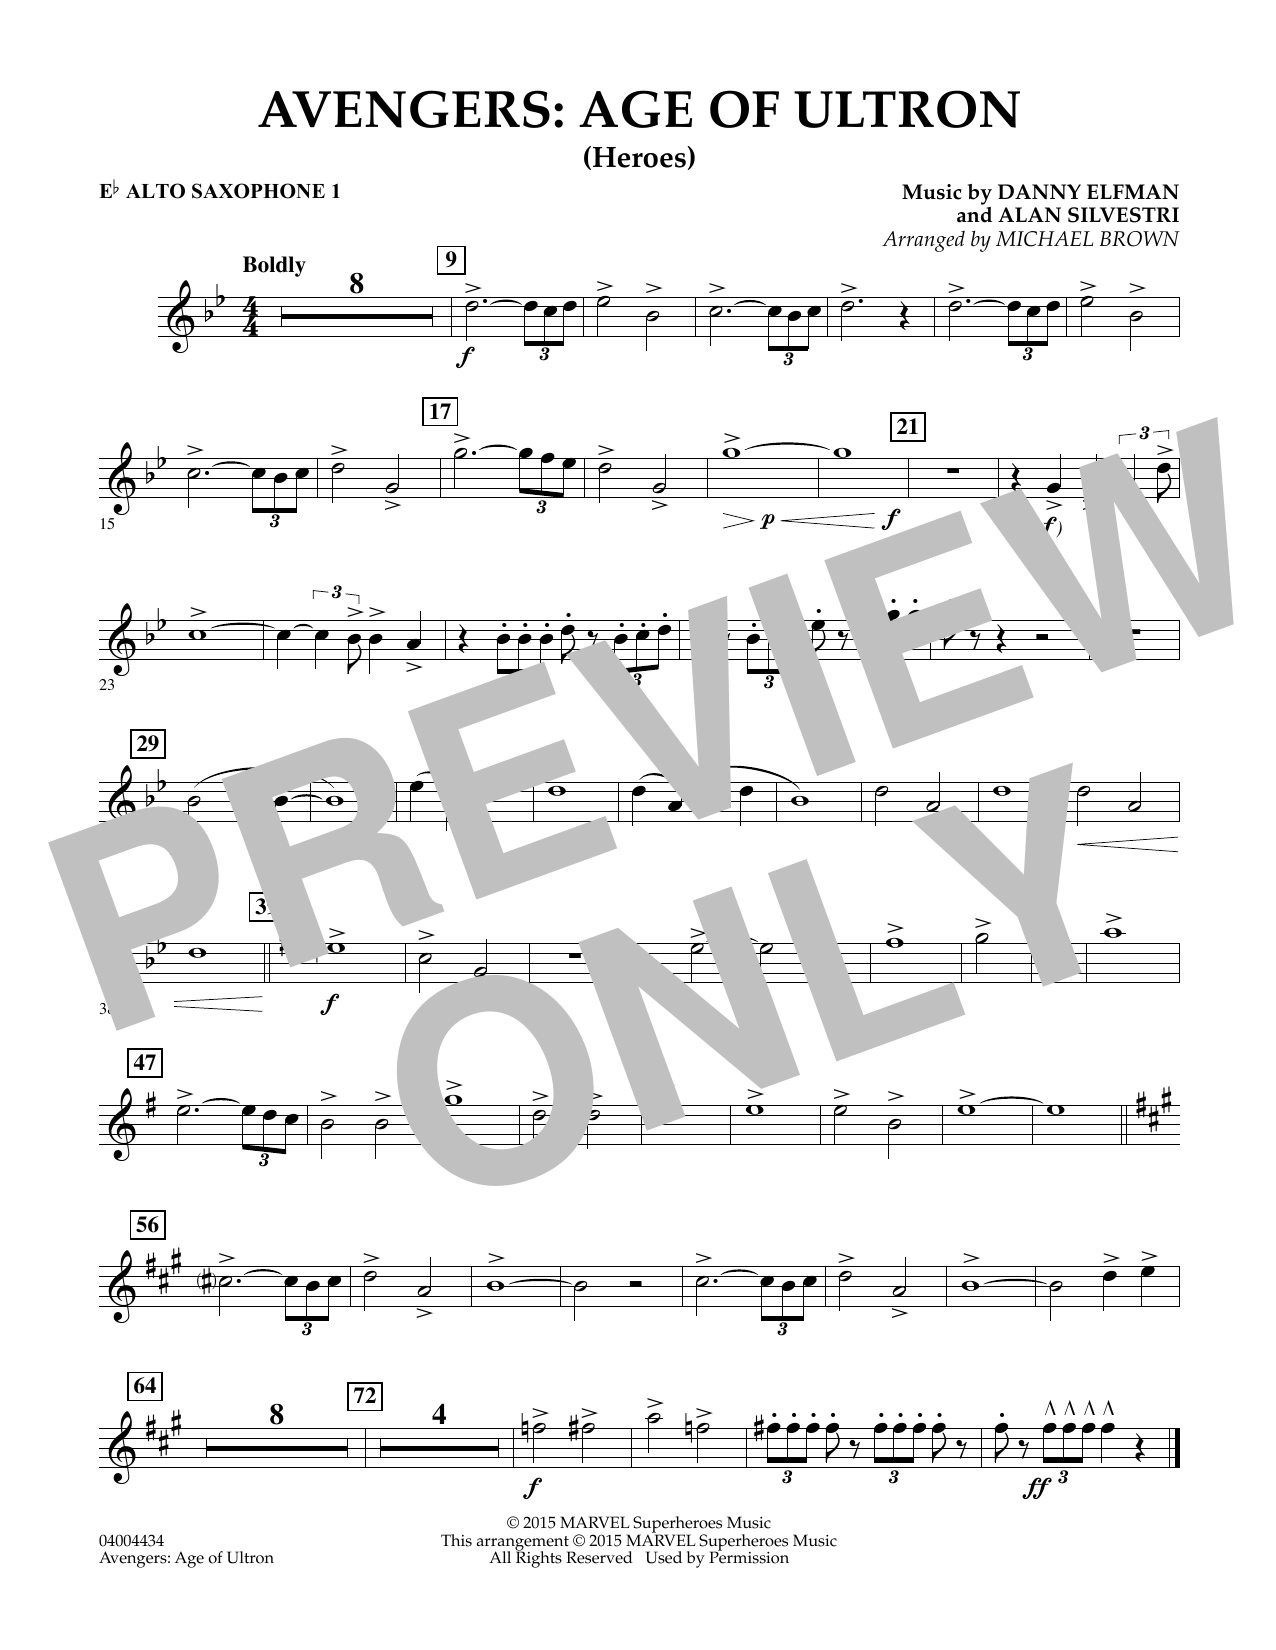 Michael Brown Avengers: The Age of Ultron (Main Theme) - Eb Alto Saxophone 1 sheet music notes and chords. Download Printable PDF.